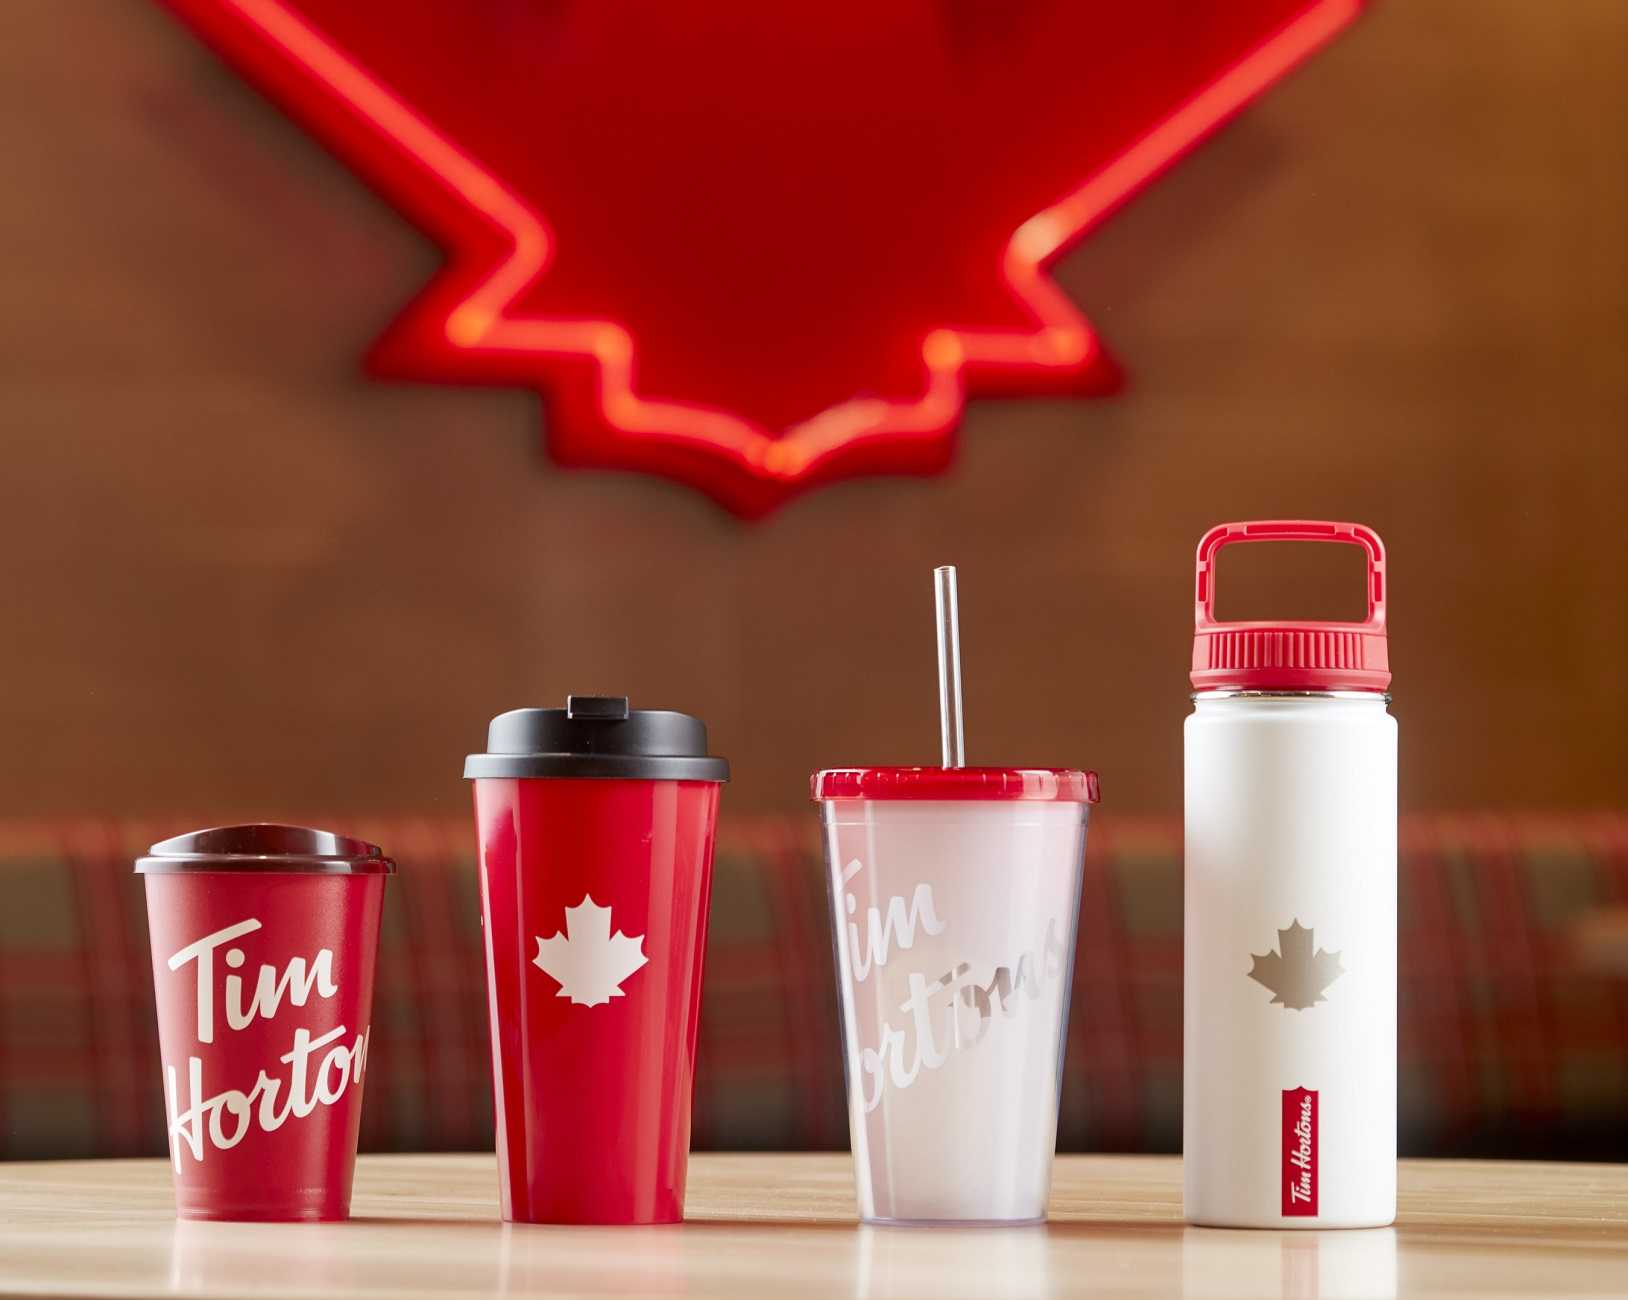 Tim Hortons makes investments to elevate the coffee experience